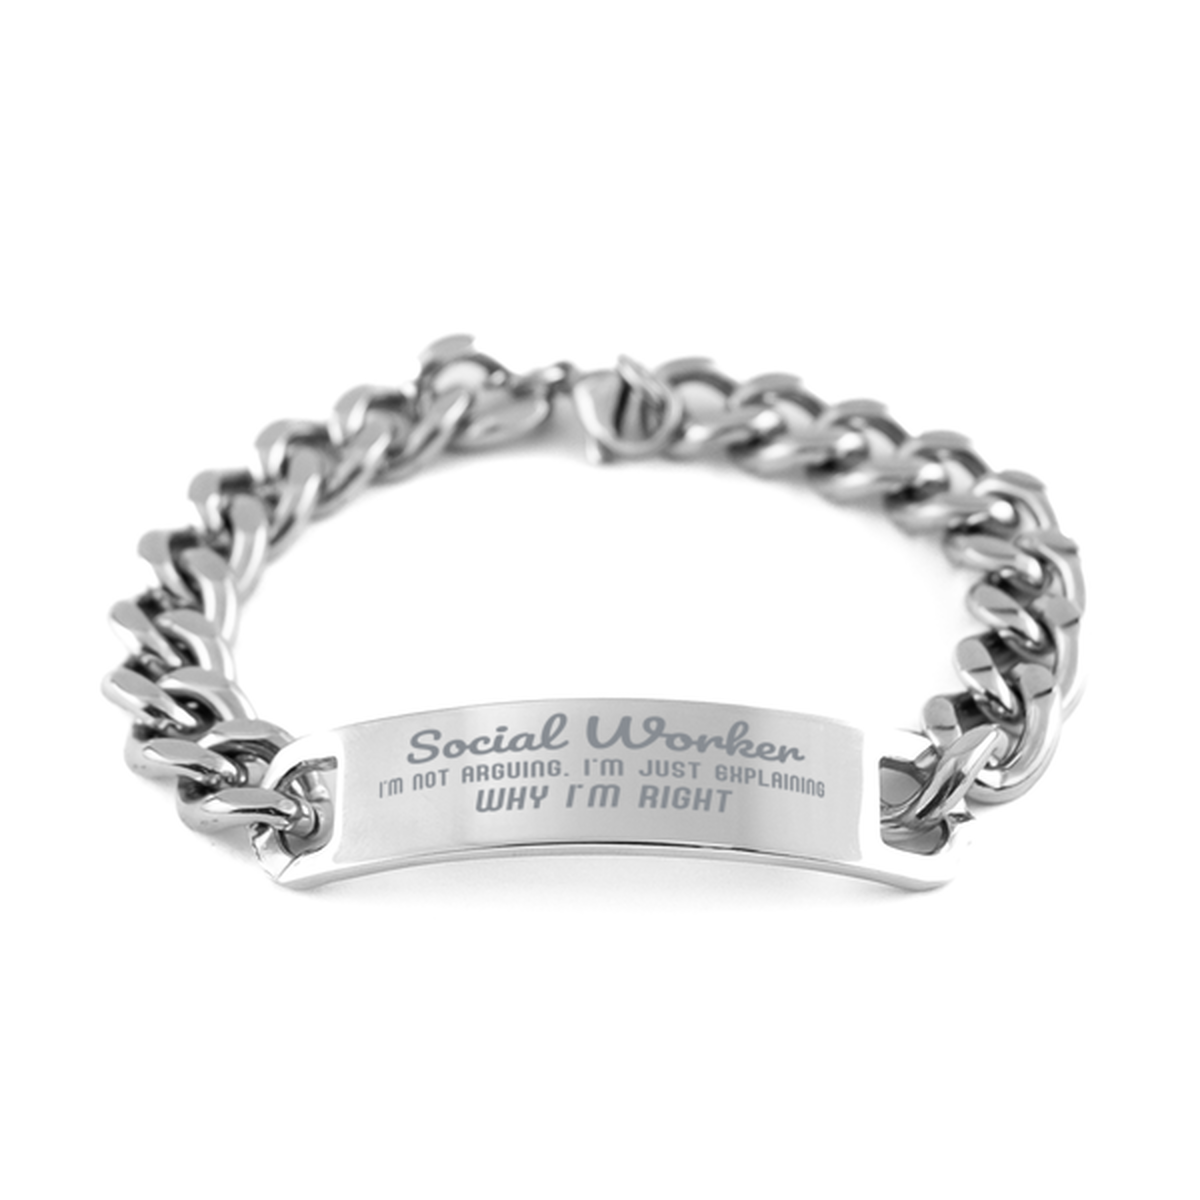 Social Worker I'm not Arguing. I'm Just Explaining Why I'm RIGHT Cuban Chain Stainless Steel Bracelet, Graduation Birthday Christmas Social Worker Gifts For Social Worker Funny Saying Quote Present for Men Women Coworker